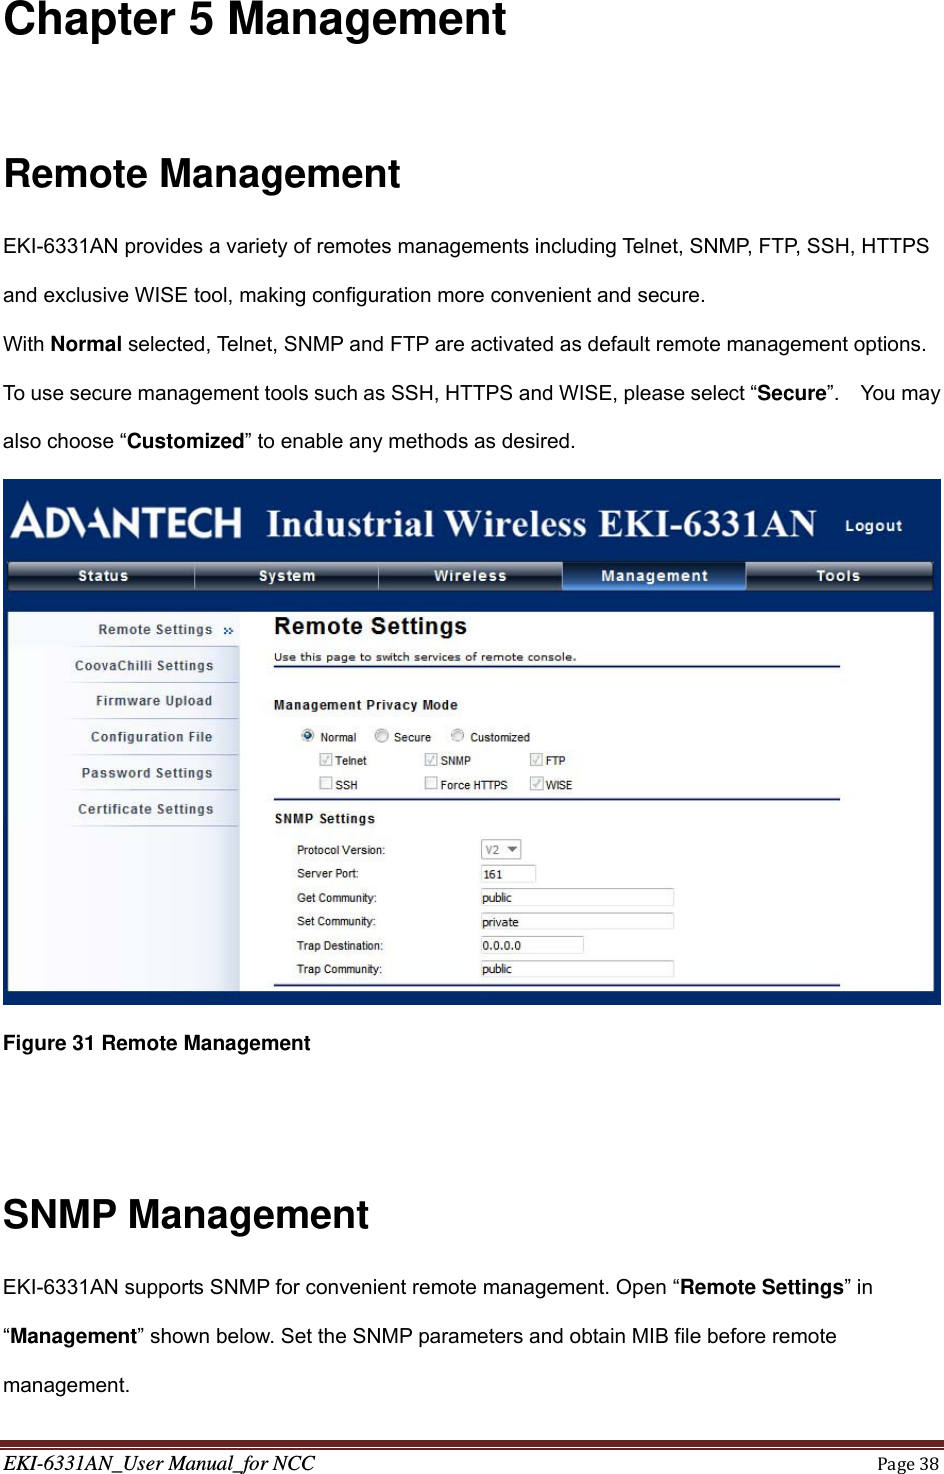 EKI-6331AN_User Manual_for NCCPage38Chapter 5 Management  Remote Management EKI-6331AN provides a variety of remotes managements including Telnet, SNMP, FTP, SSH, HTTPS and exclusive WISE tool, making configuration more convenient and secure. With Normal selected, Telnet, SNMP and FTP are activated as default remote management options.   To use secure management tools such as SSH, HTTPS and WISE, please select “Secure”.  You may also choose “Customized” to enable any methods as desired.  Figure 31 Remote Management   SNMP Management EKI-6331AN supports SNMP for convenient remote management. Open “Remote Settings” in “Management” shown below. Set the SNMP parameters and obtain MIB file before remote management. 